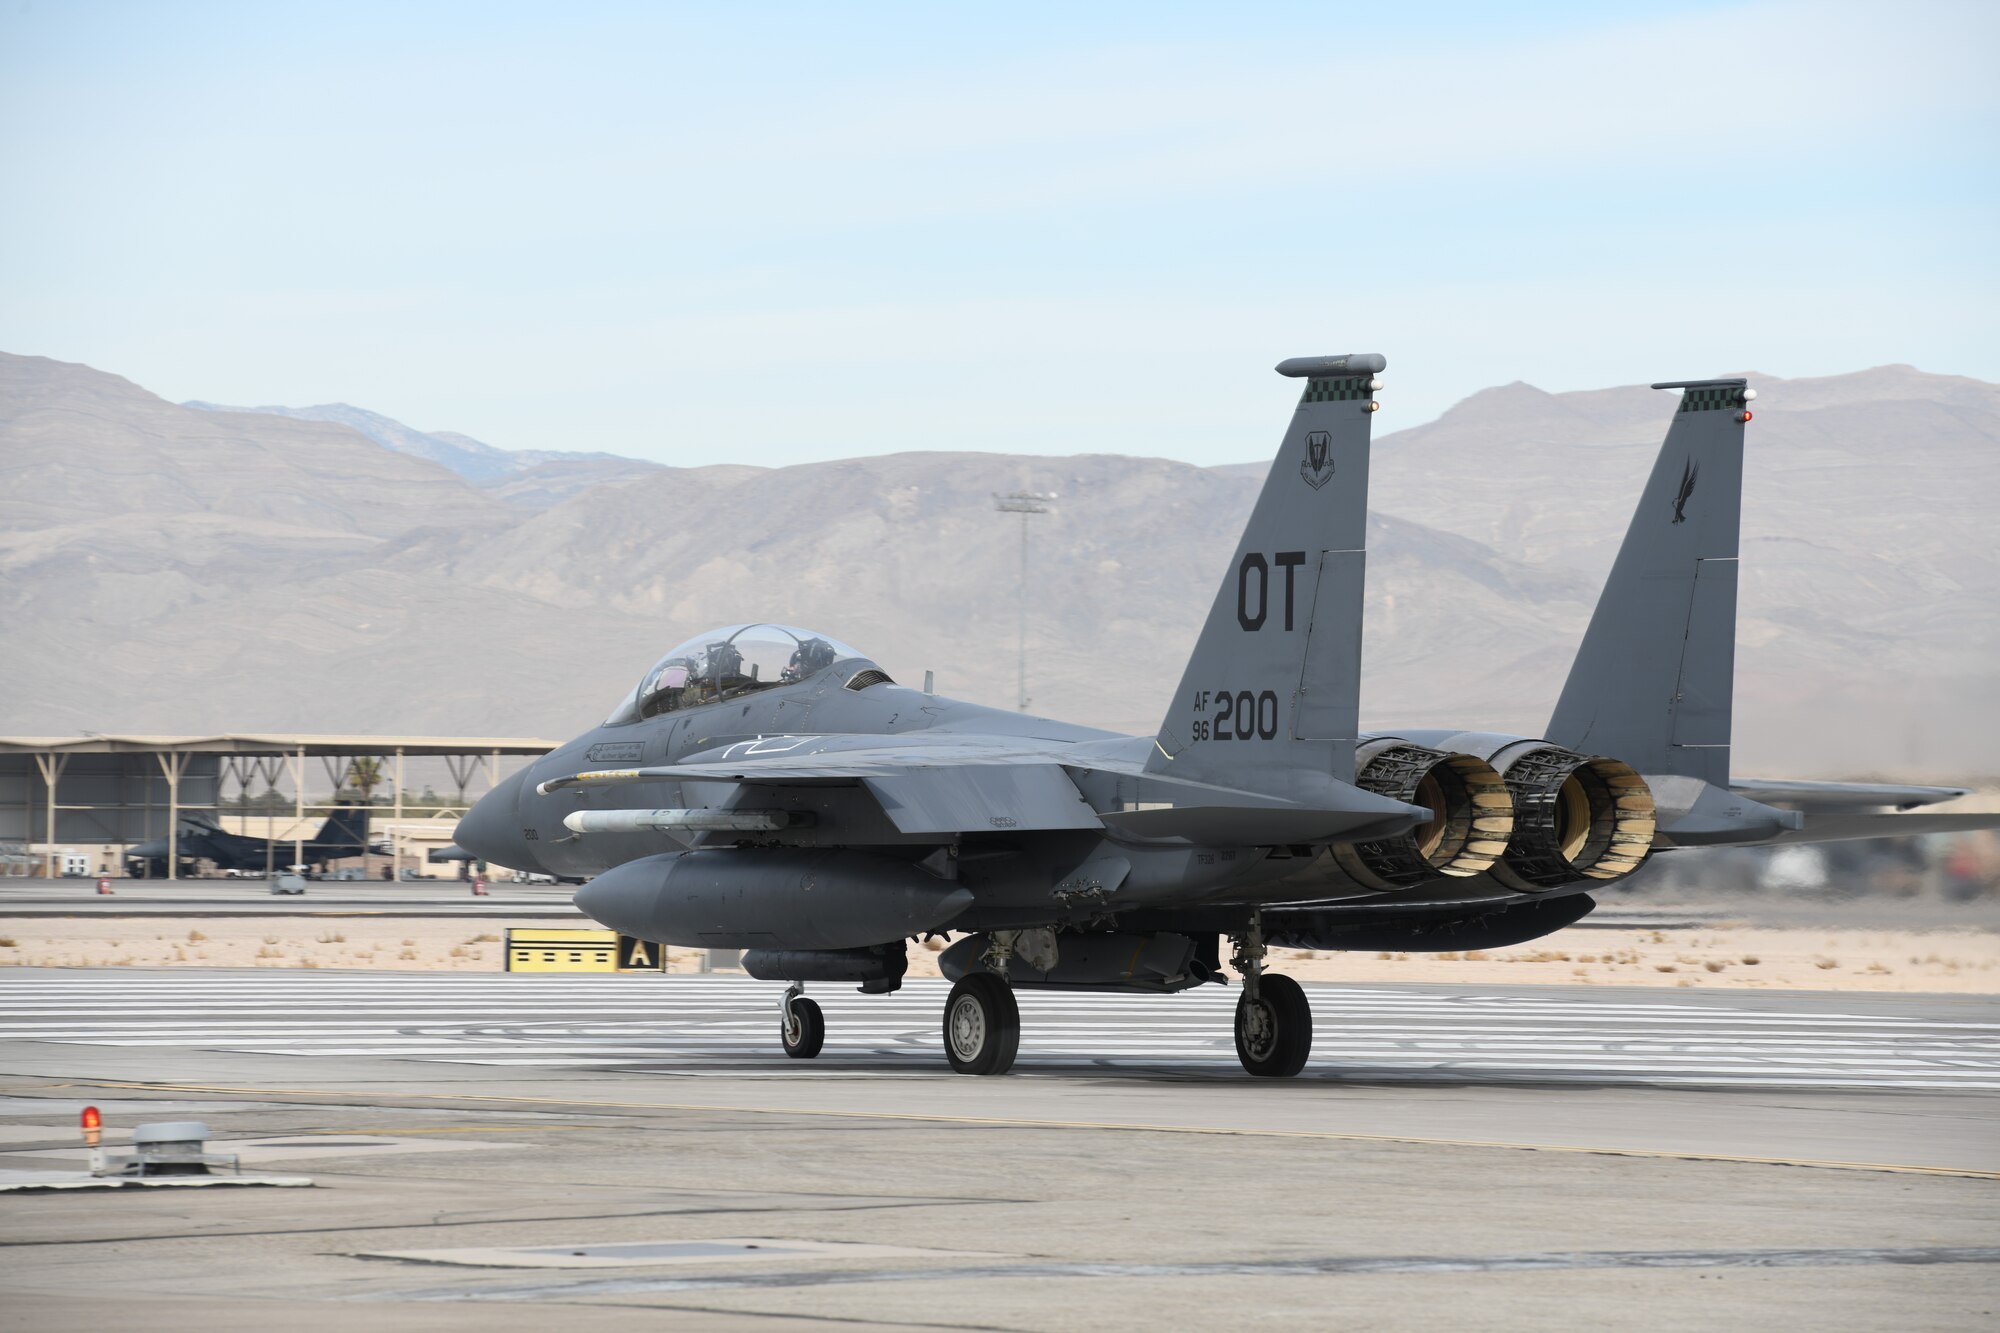 A combined reserve and active duty test team from Nellis Air Force Base conducted an AGM-158B Joint Air-to-Surface Standoff Missile drop from an F-15E, Jan. 7.